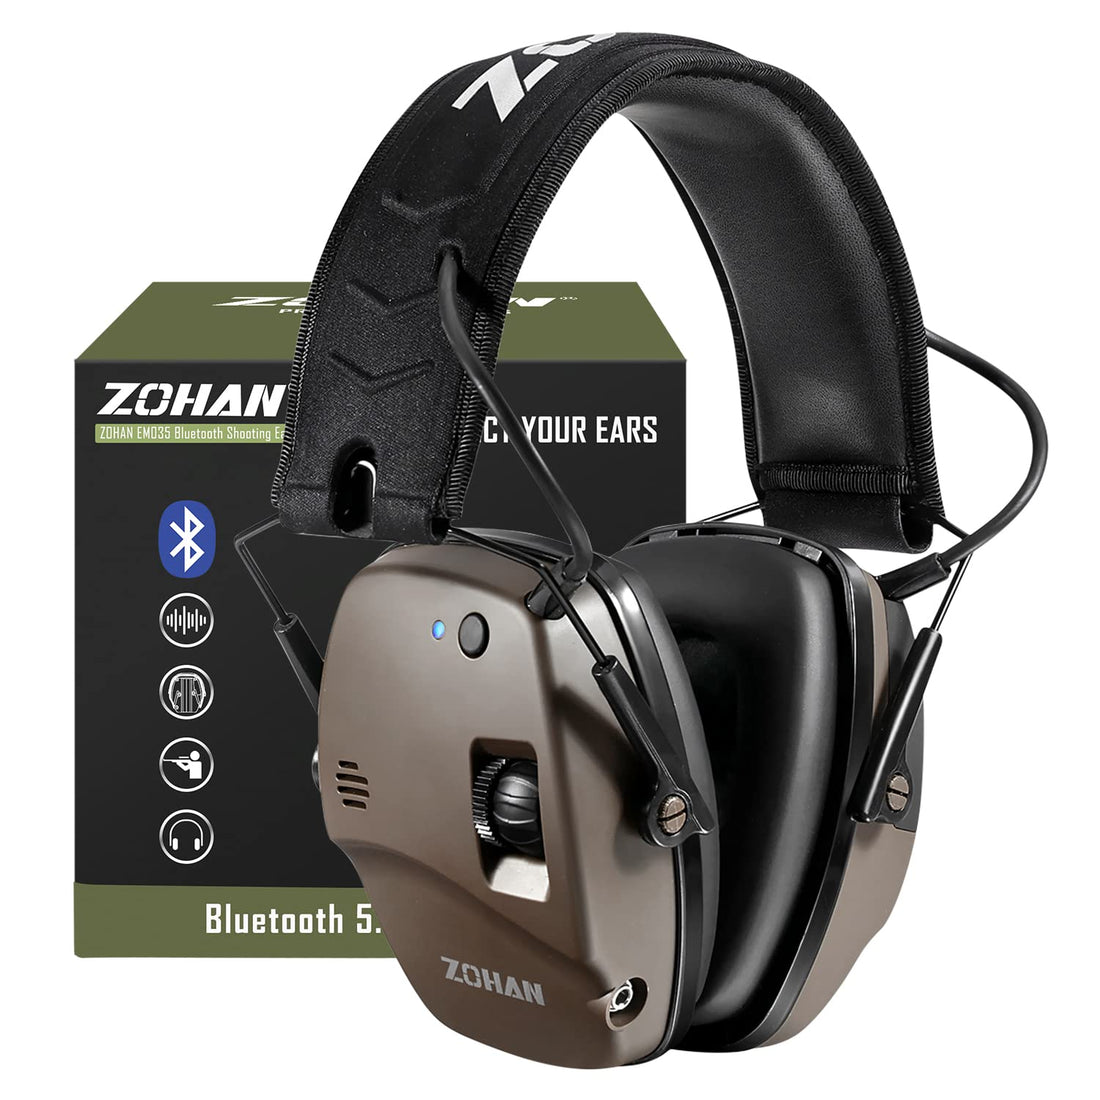 ZOHAN EM035 Bluetooth 5.0 Shooting Ear Protection for Gun Range, Slim Active NoiseCcanceling with 22dB, Hunting Hearing Protection with Sound Amplification